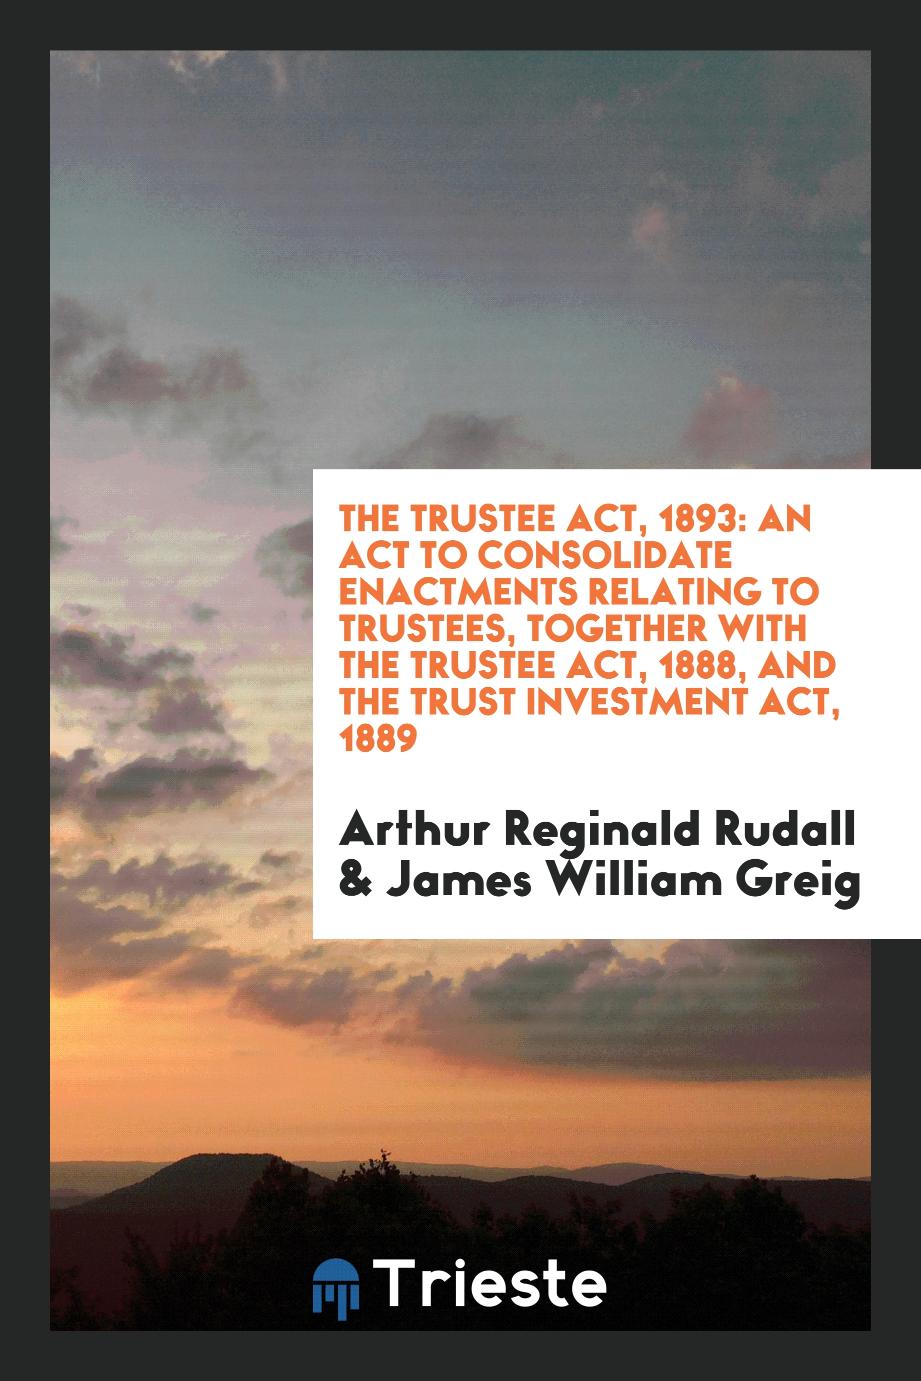 The Trustee Act, 1893: An Act to Consolidate Enactments Relating to Trustees, Together with the Trustee Act, 1888, and the Trust Investment Act, 1889